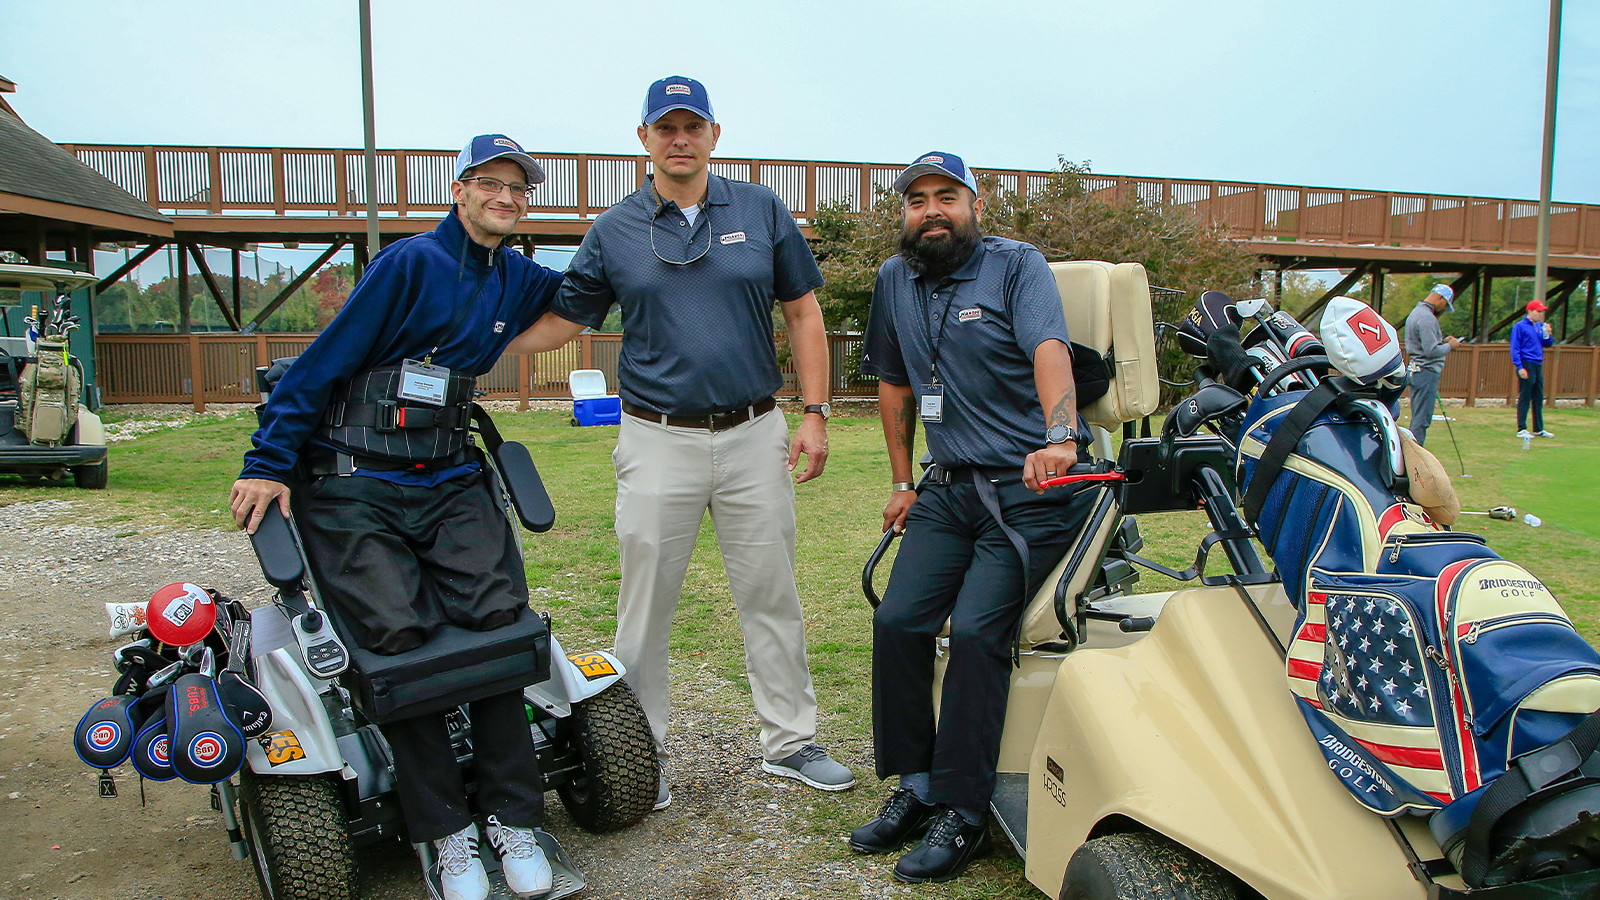 Matt Underwood (center) with fellow Veterans during the Golf Training event for PGA HOPE National Golf & Wellness Week at East Potomac Golf Course, Washington, DC on October 26, 2019